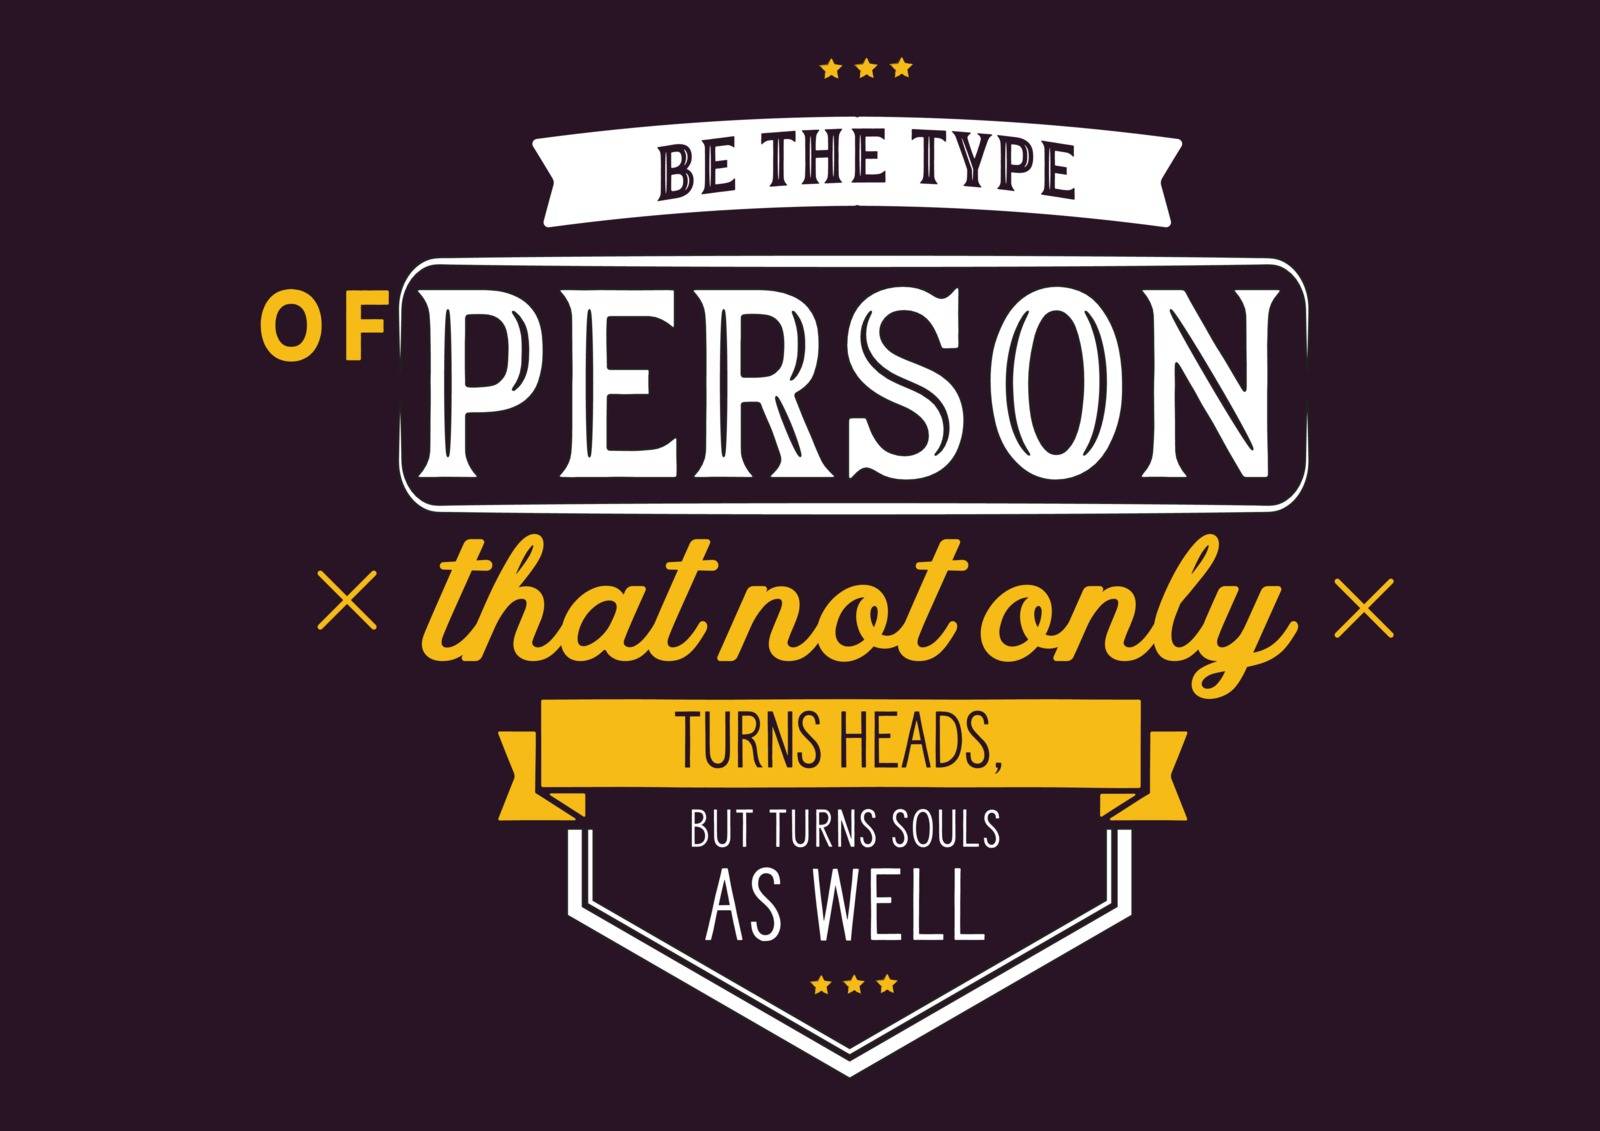 Be the type of person that not only turns heads, but turns souls as well